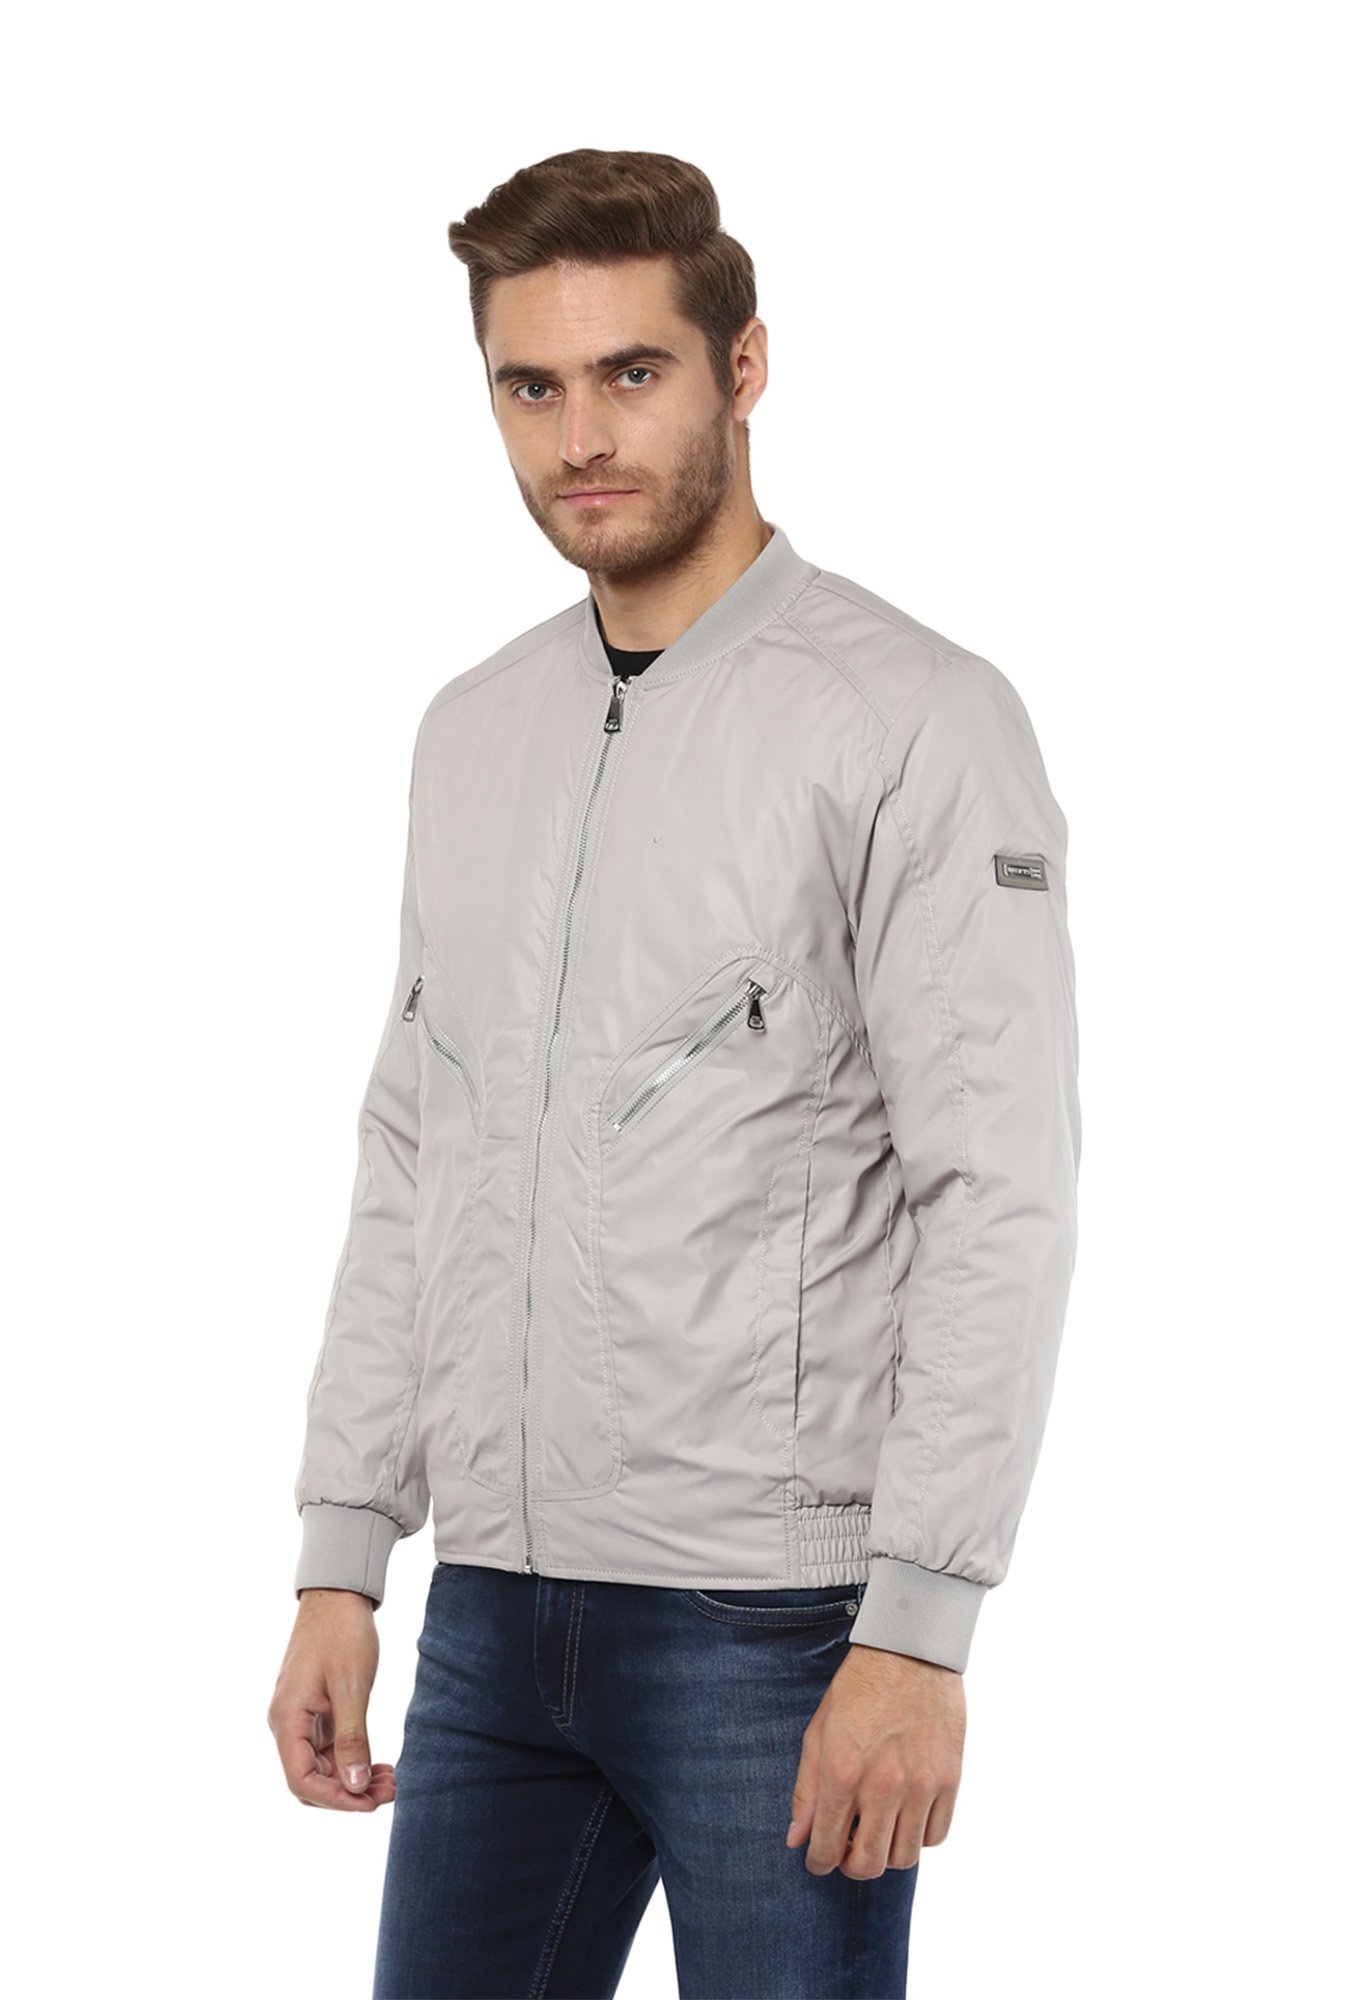 Buy mufti regular jackets in India @ Limeroad